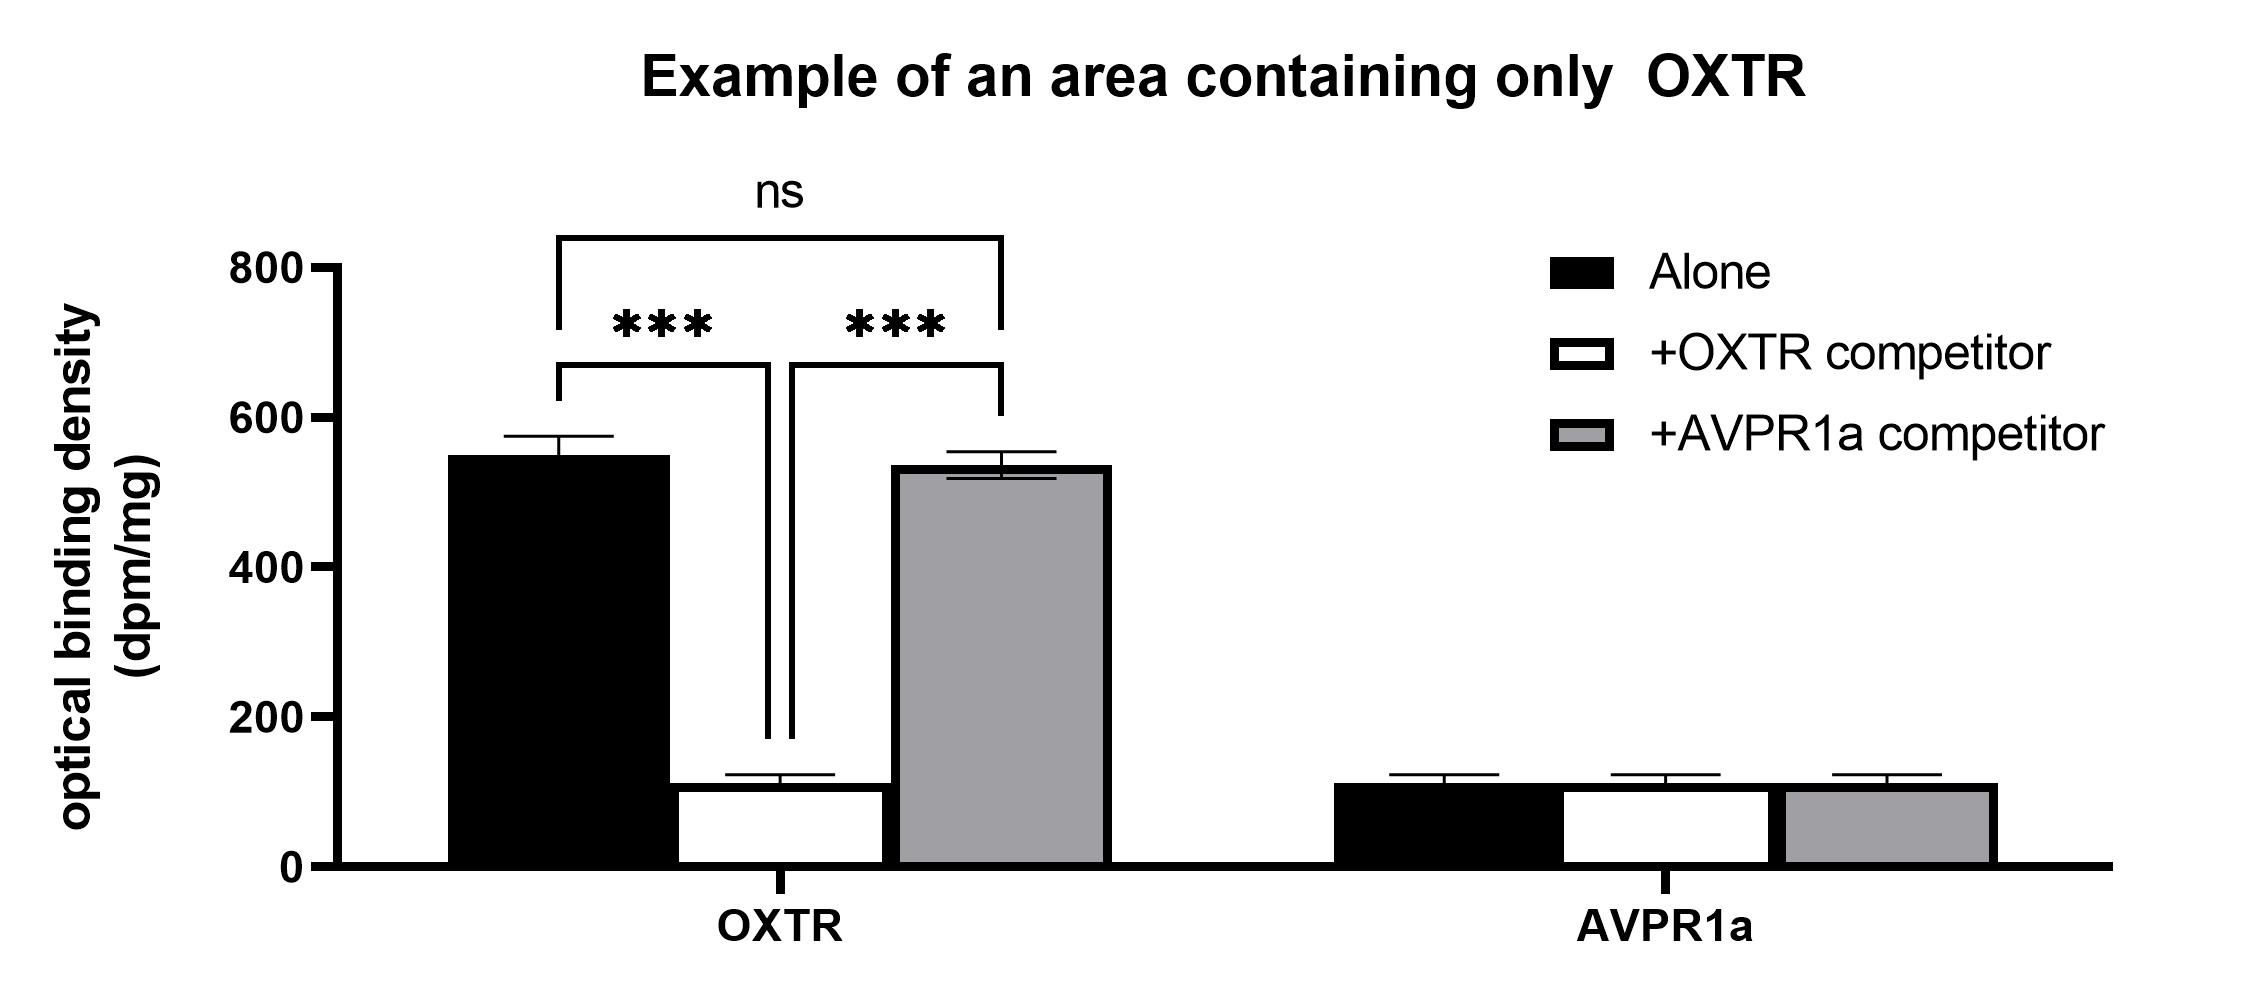 Example of an area containing only OXTR. Box graphs showing values of optical binding density in dpm/mg for alone, +OXTR competitor, and AVPR1a competitors for both OXTR and AVPR1a.